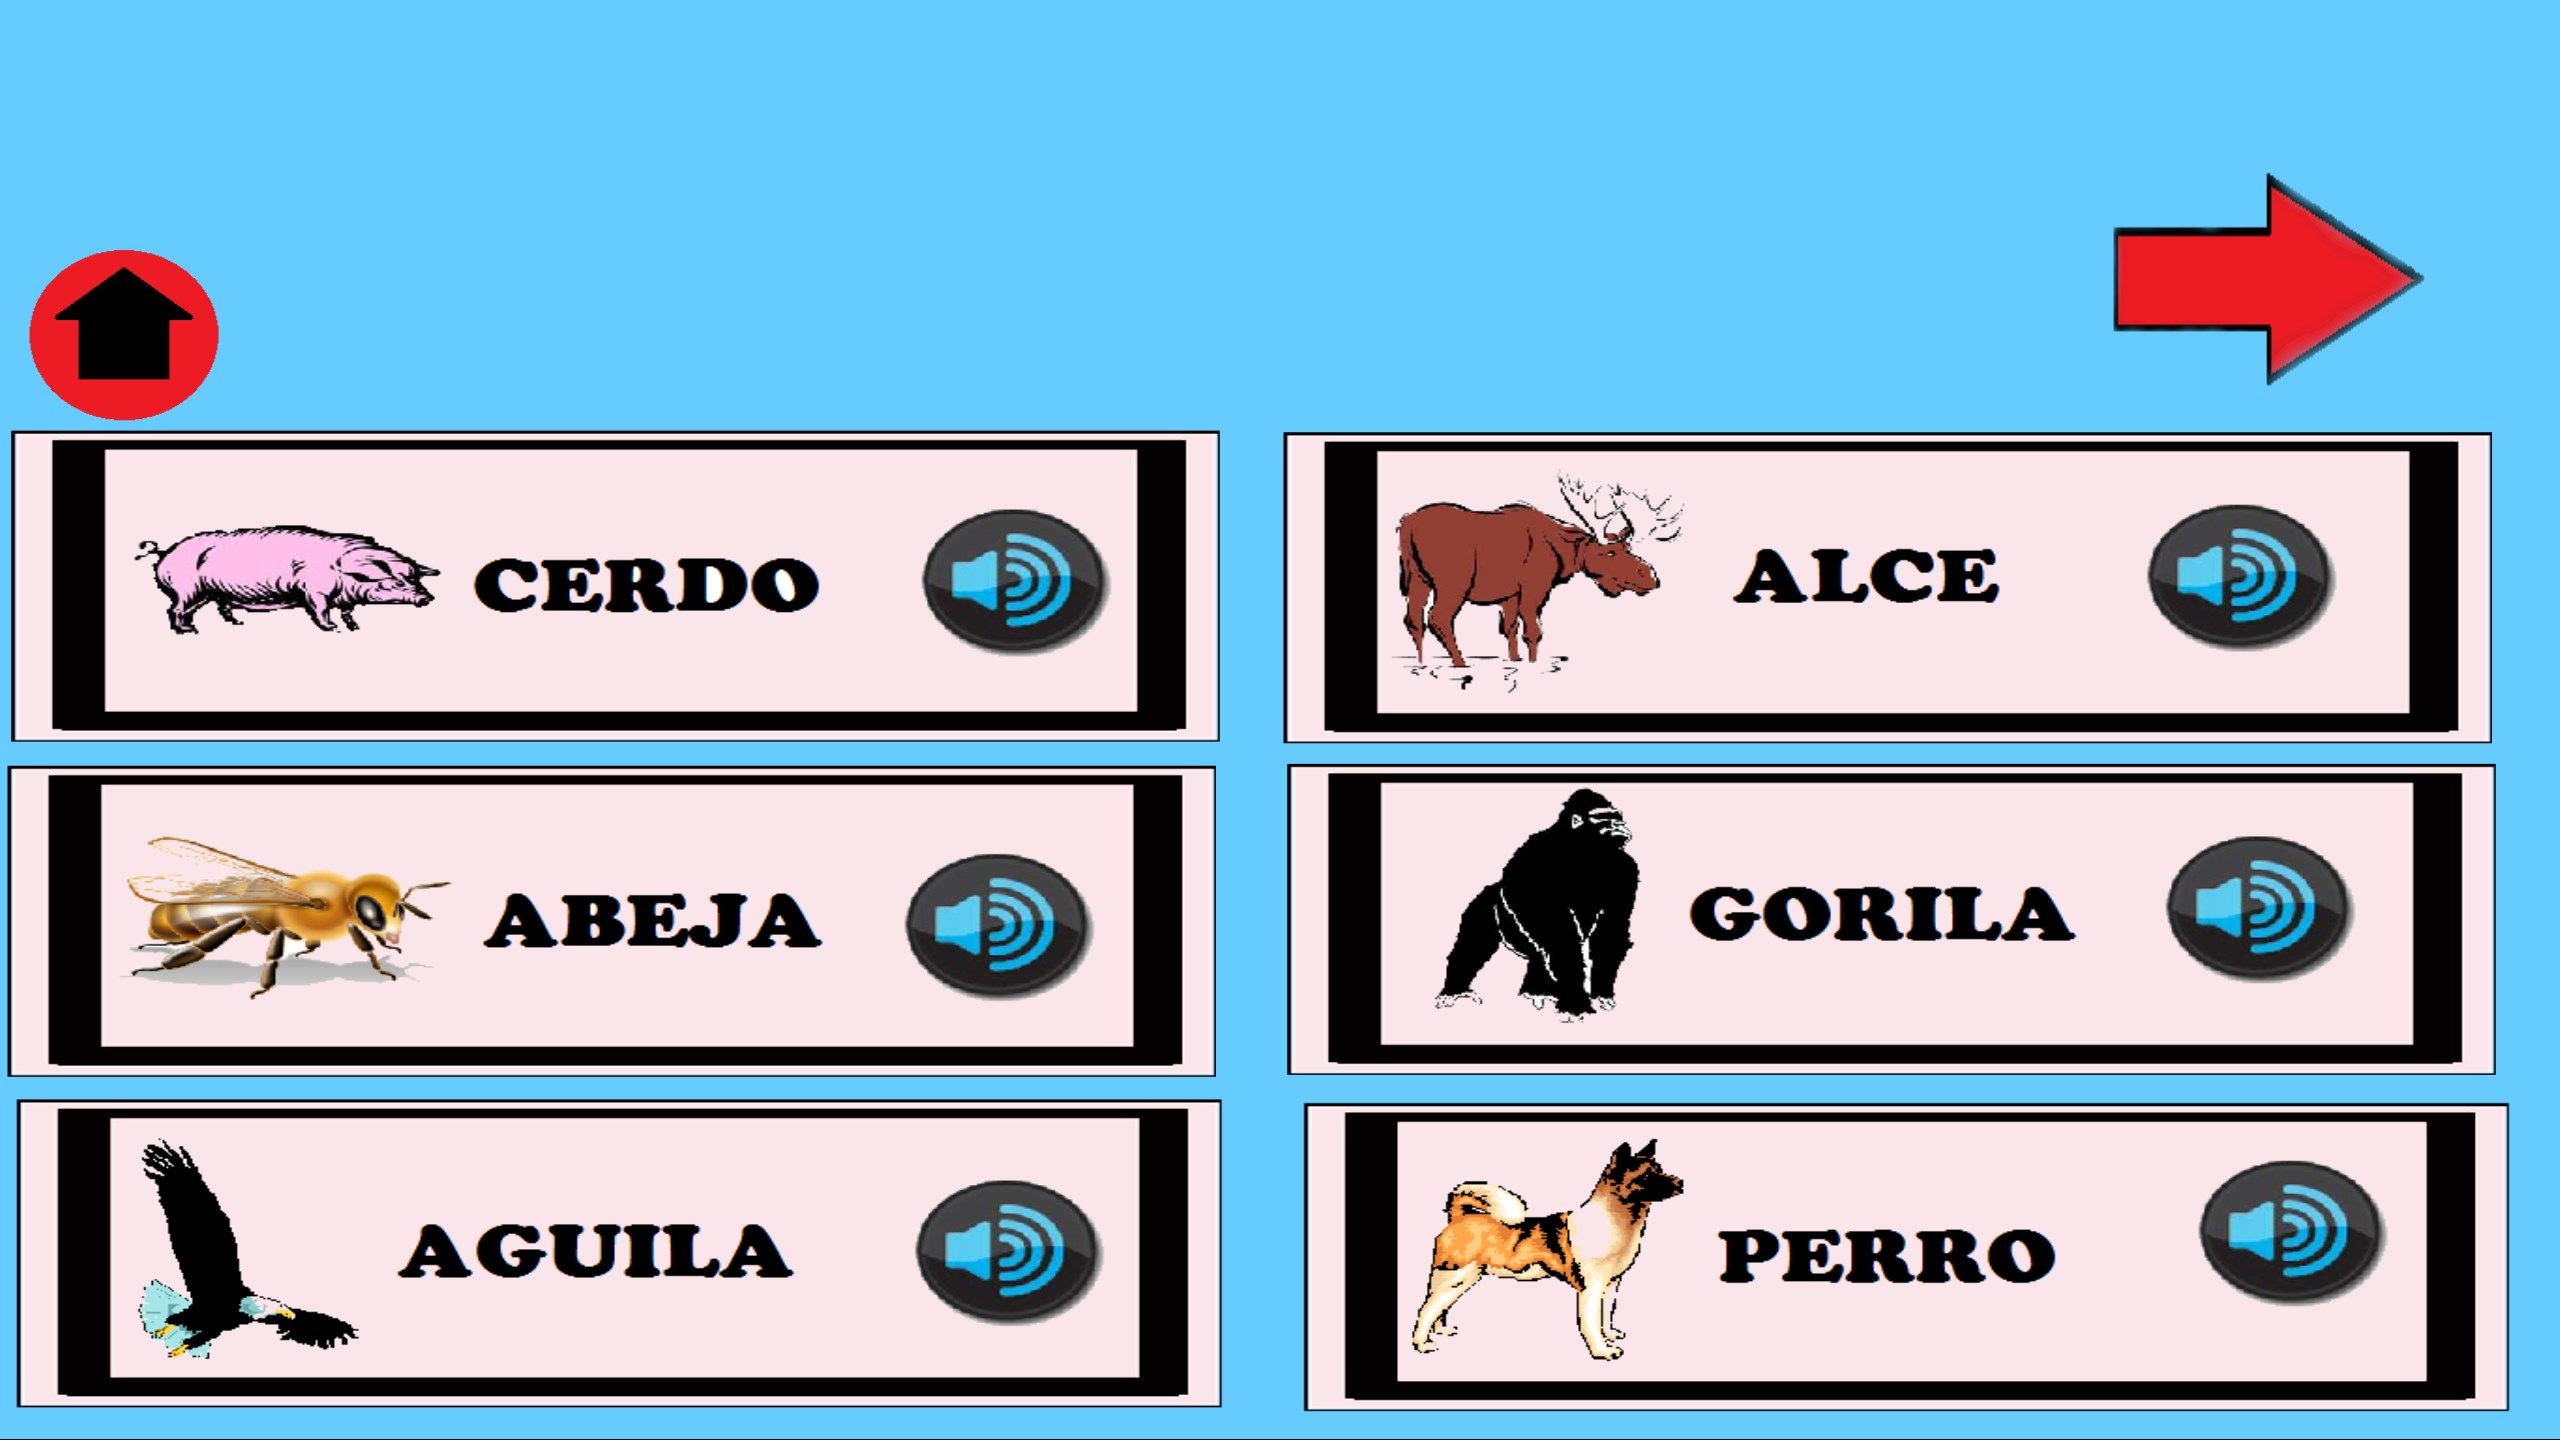 This is one of the layout of the game , with some of the animals